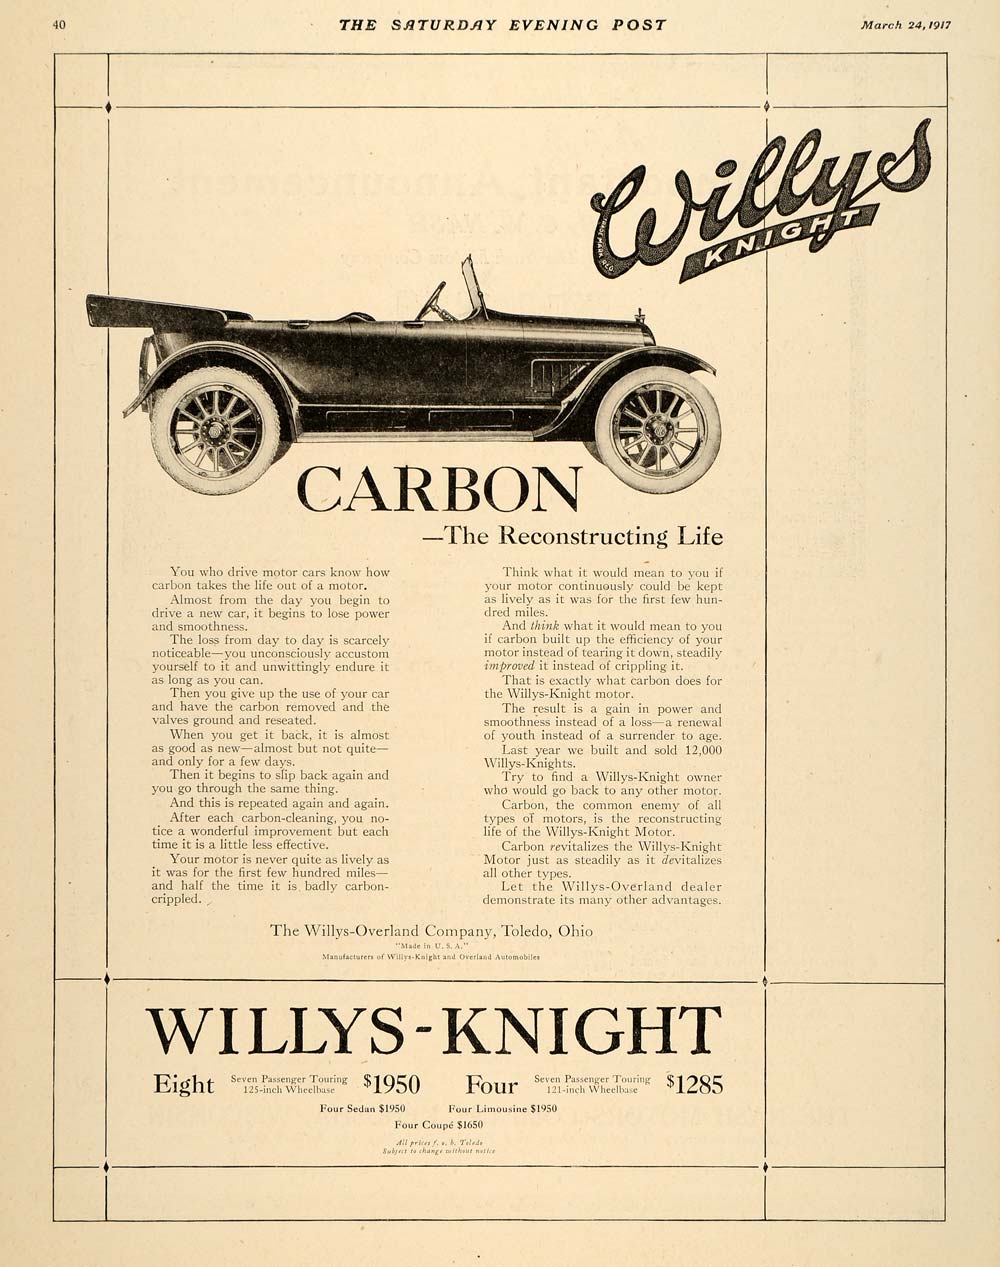 1917 Ad Antique Willys-Knight Models Carbon Pricing - ORIGINAL ADVERTISING SEP4